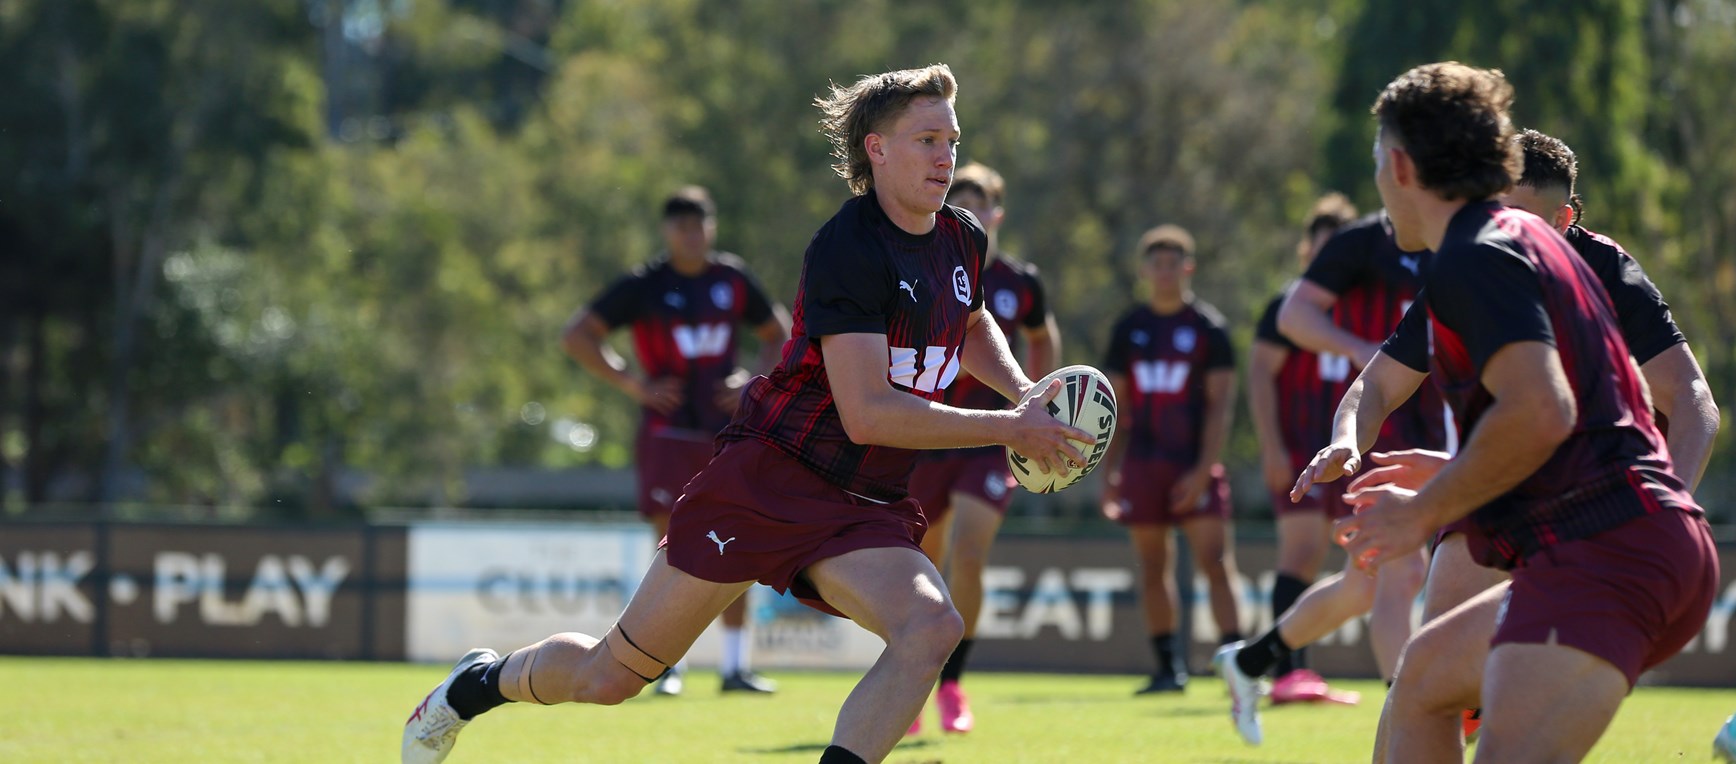 In pictures: Te'o puts Queensland Under 19s through their paces